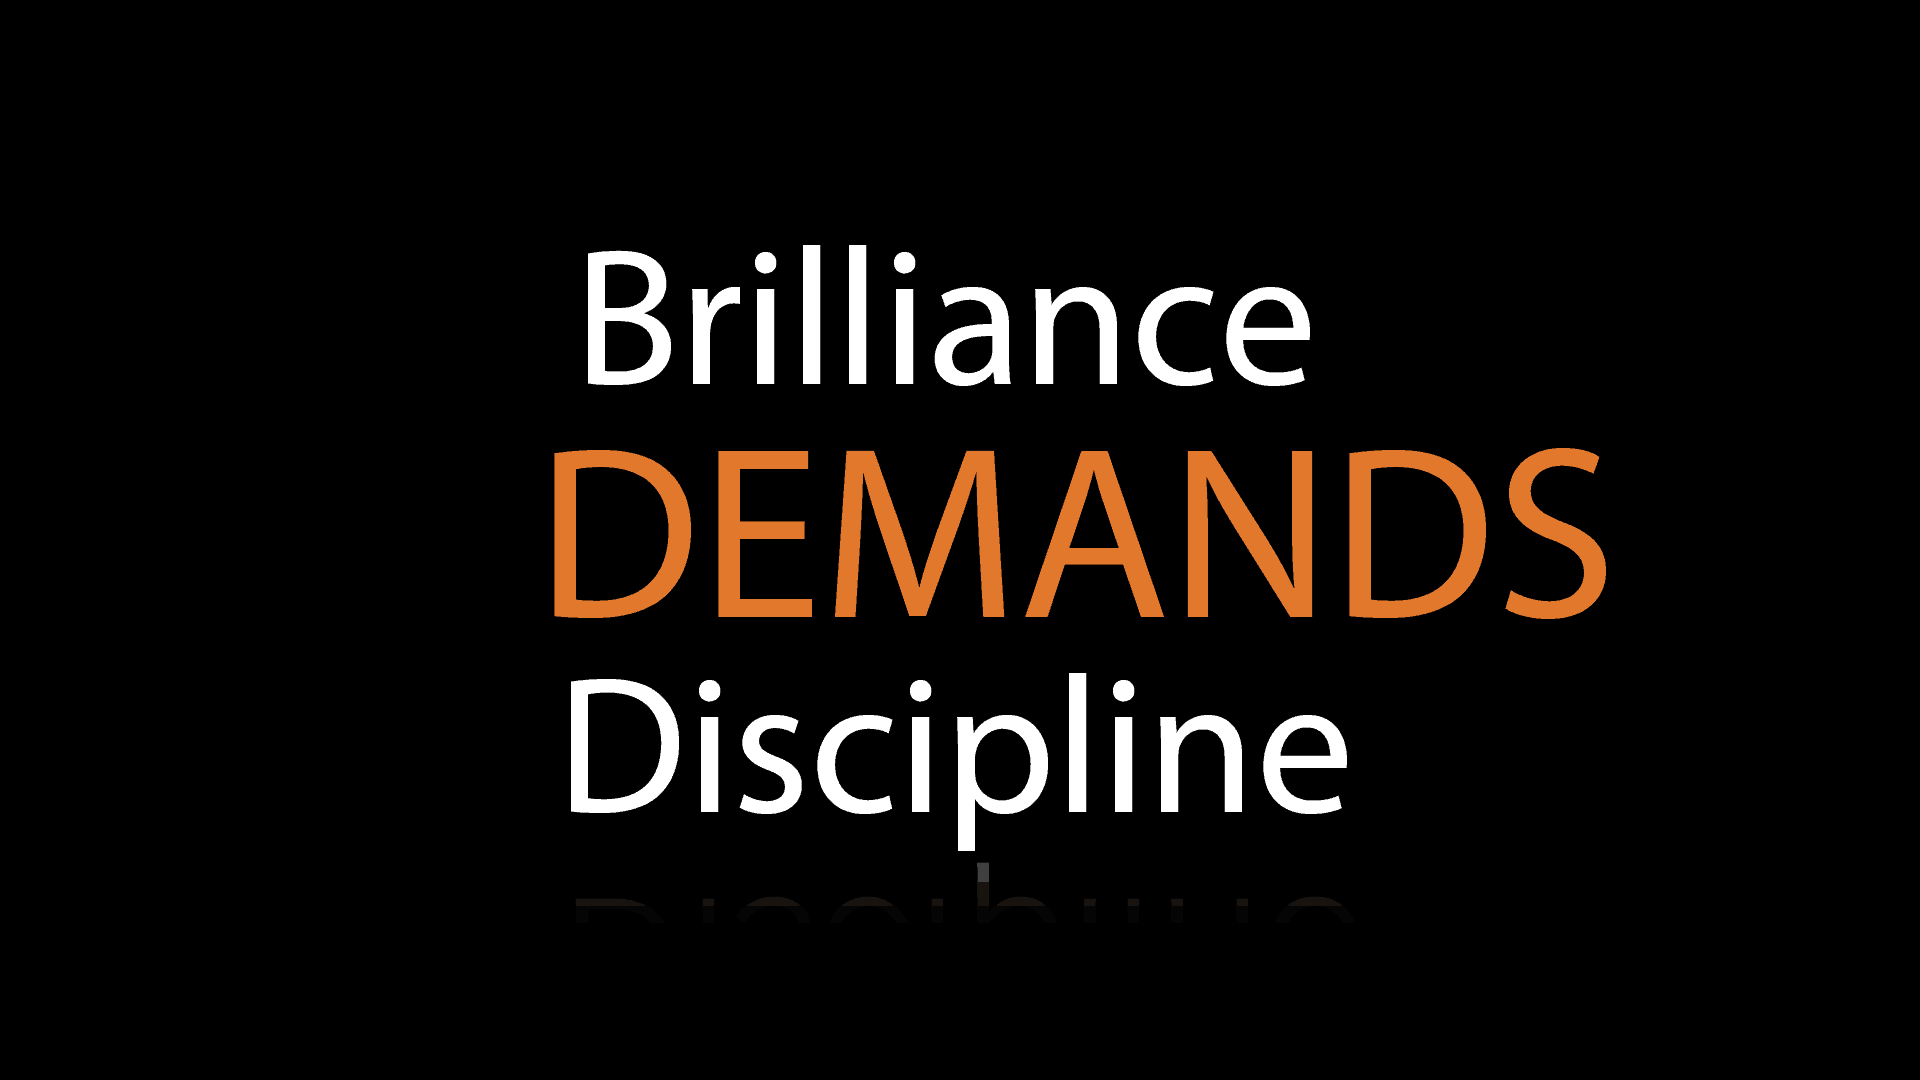 brilliance demands disciple - Todd Henry at the industrial marketing summit